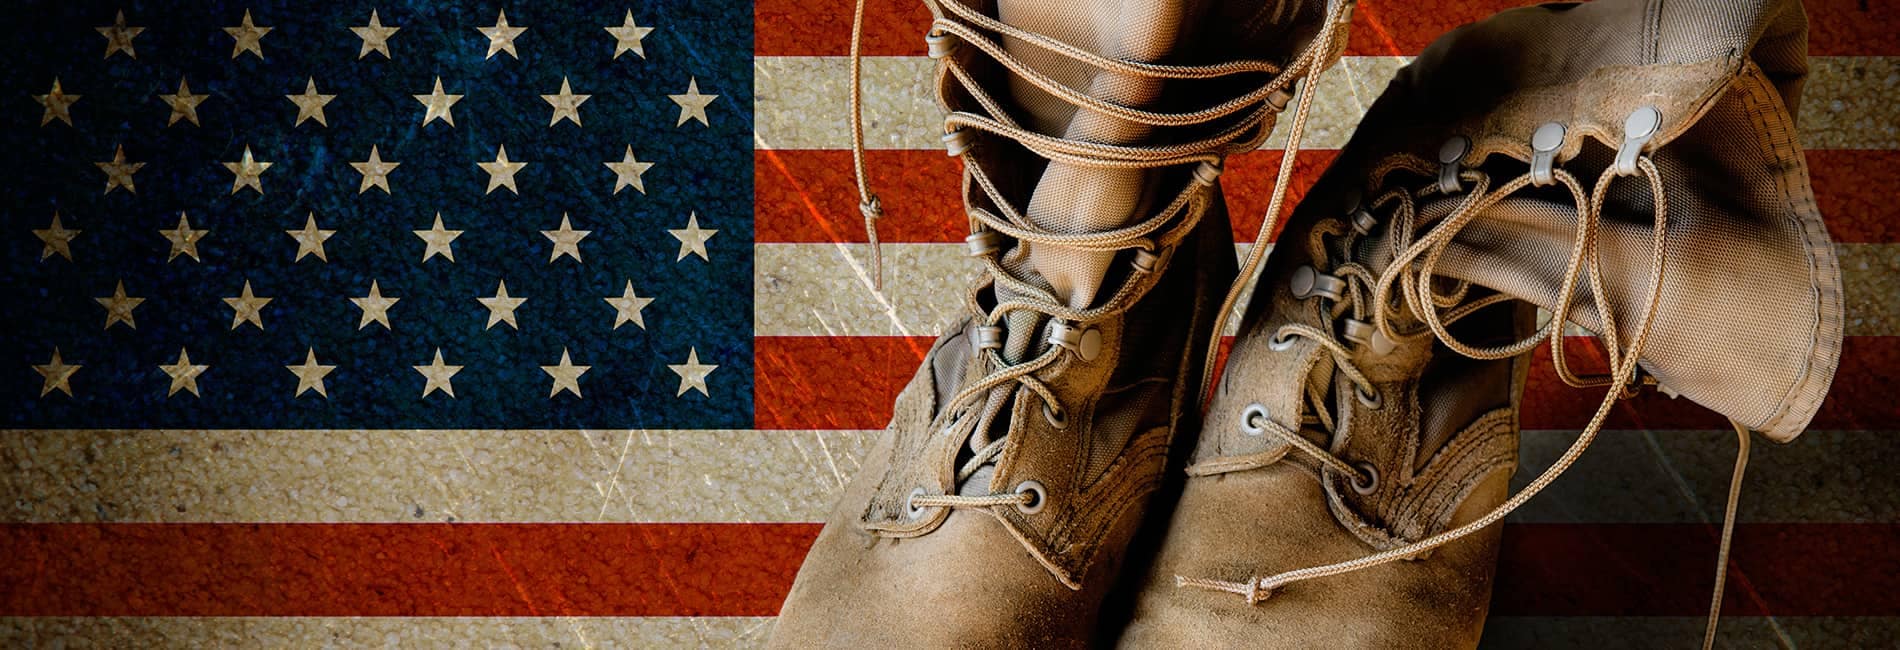 Military style boots on top of an American flag background